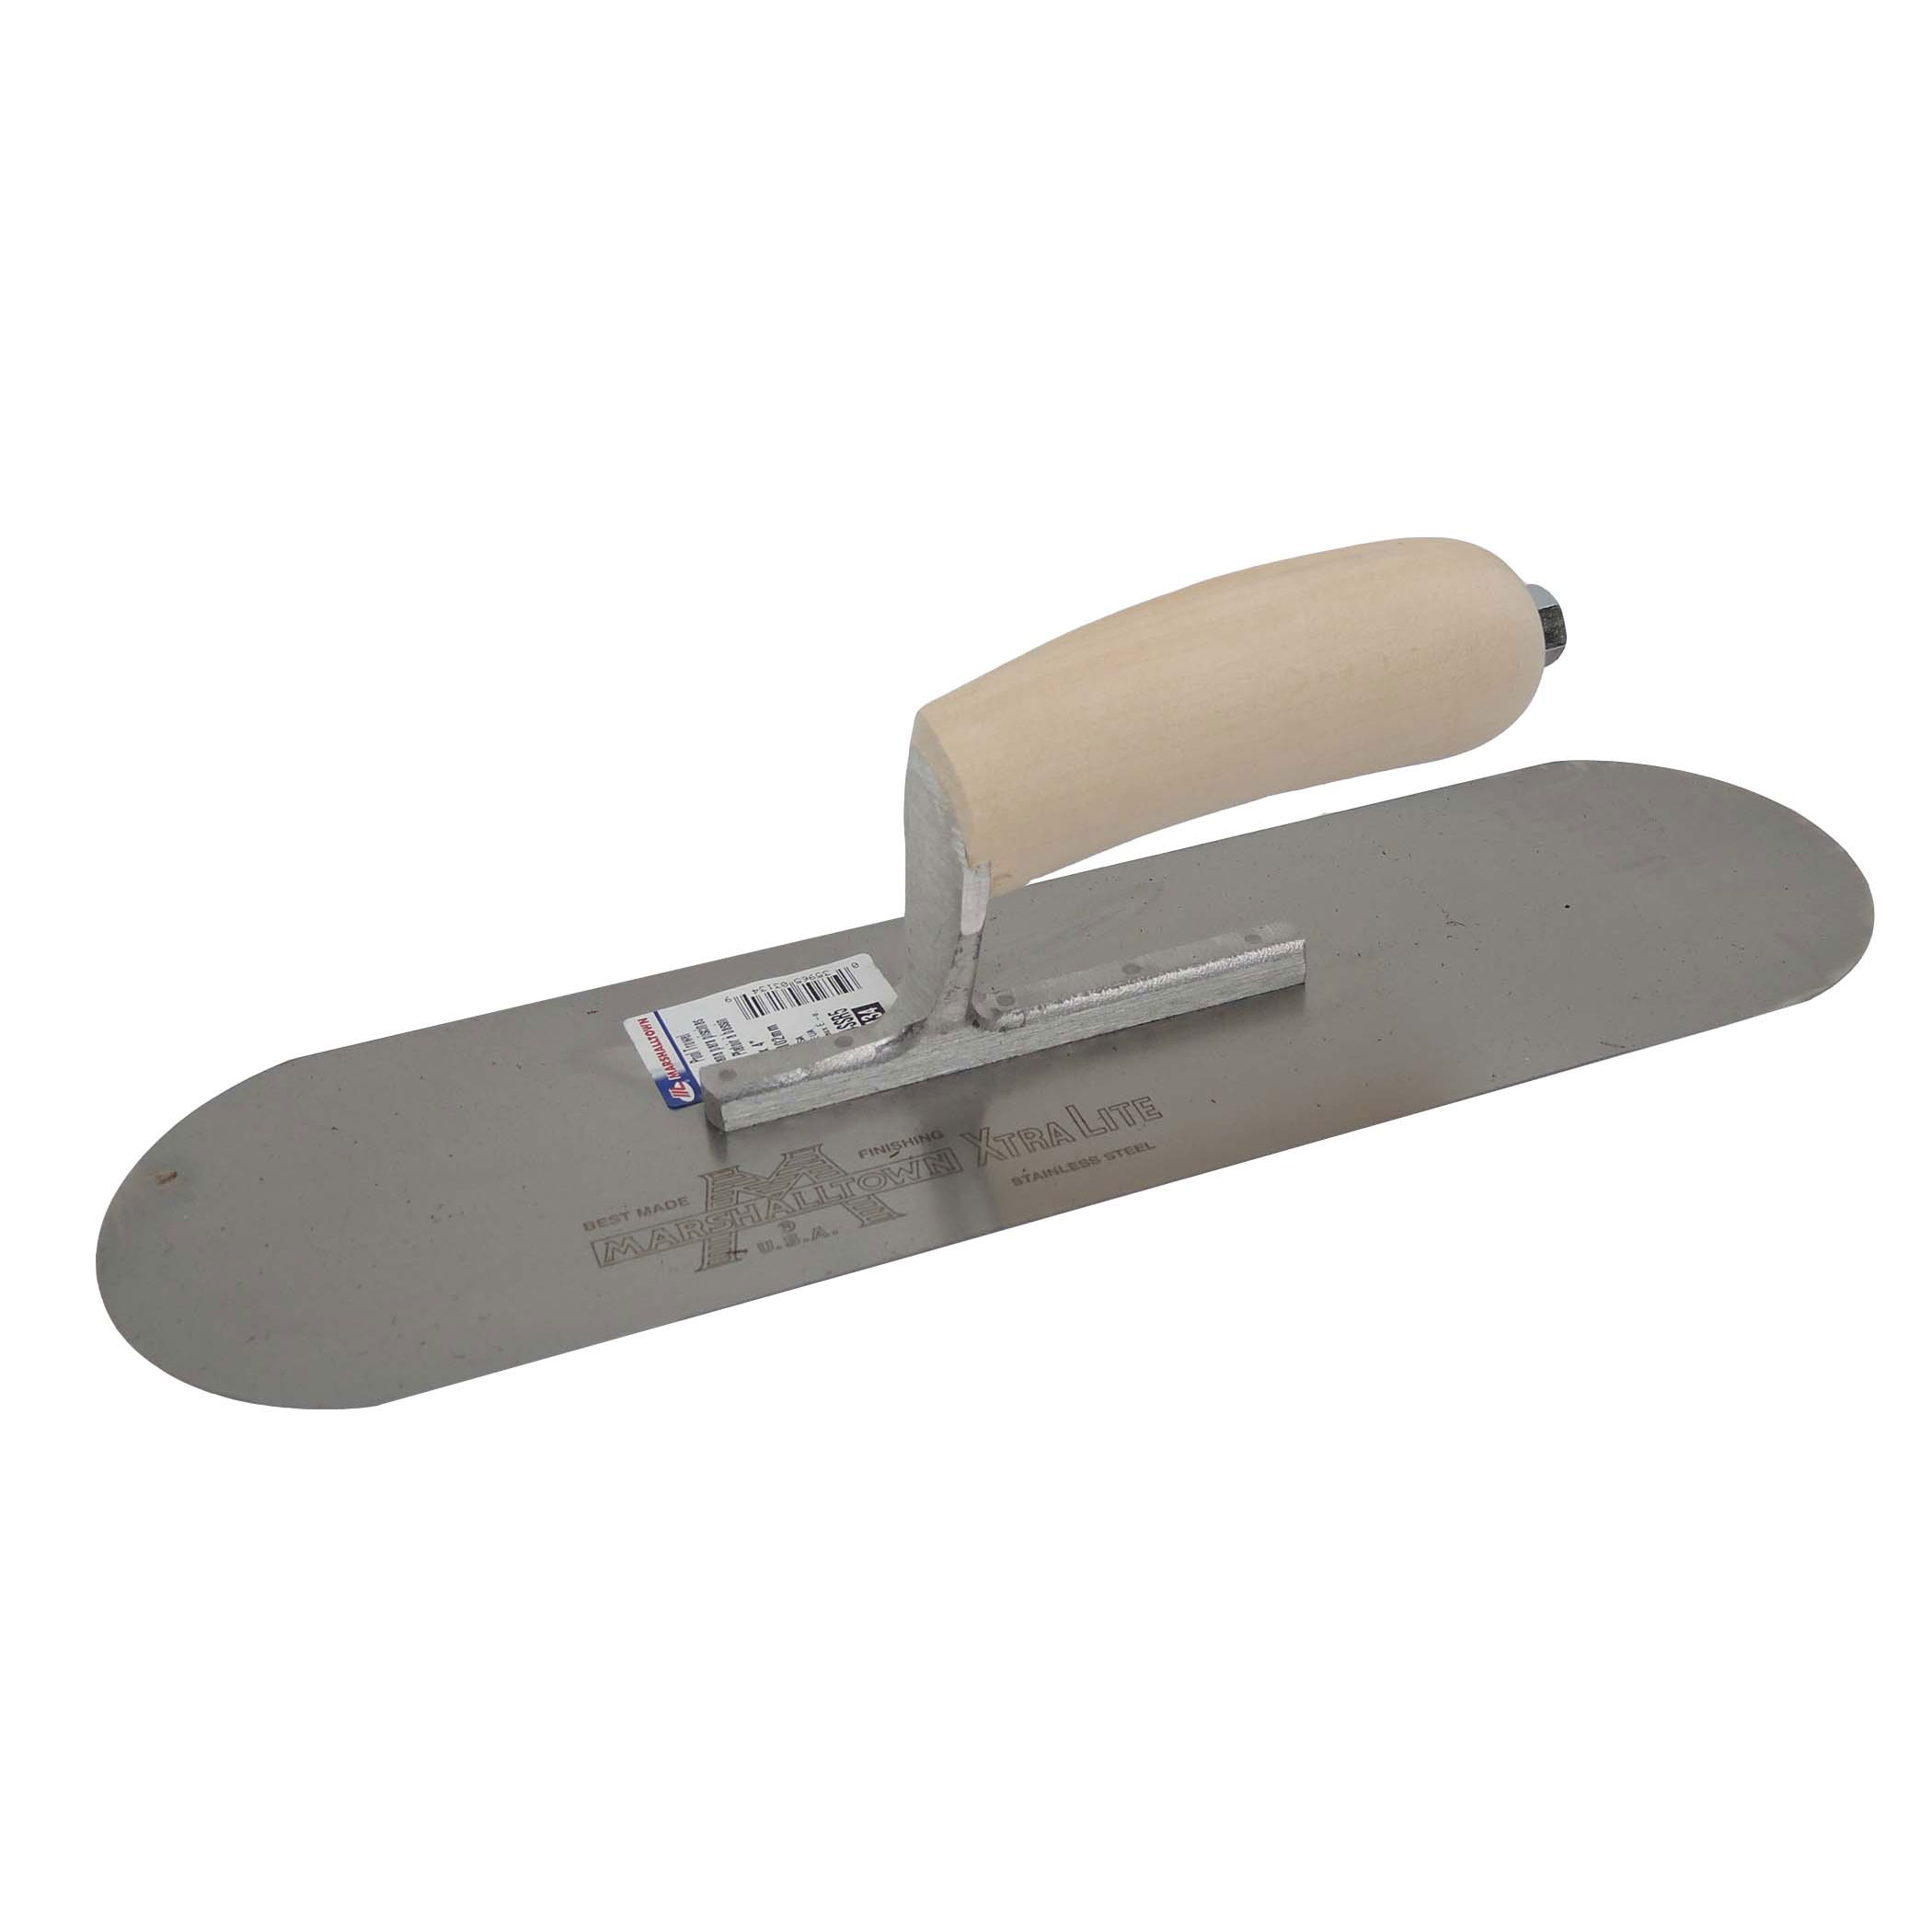 Marshalltown SP14SSR5 14in x 4in Pool Trowel with Exposed Rivet Trowels and Wood Handle SP14SSR5